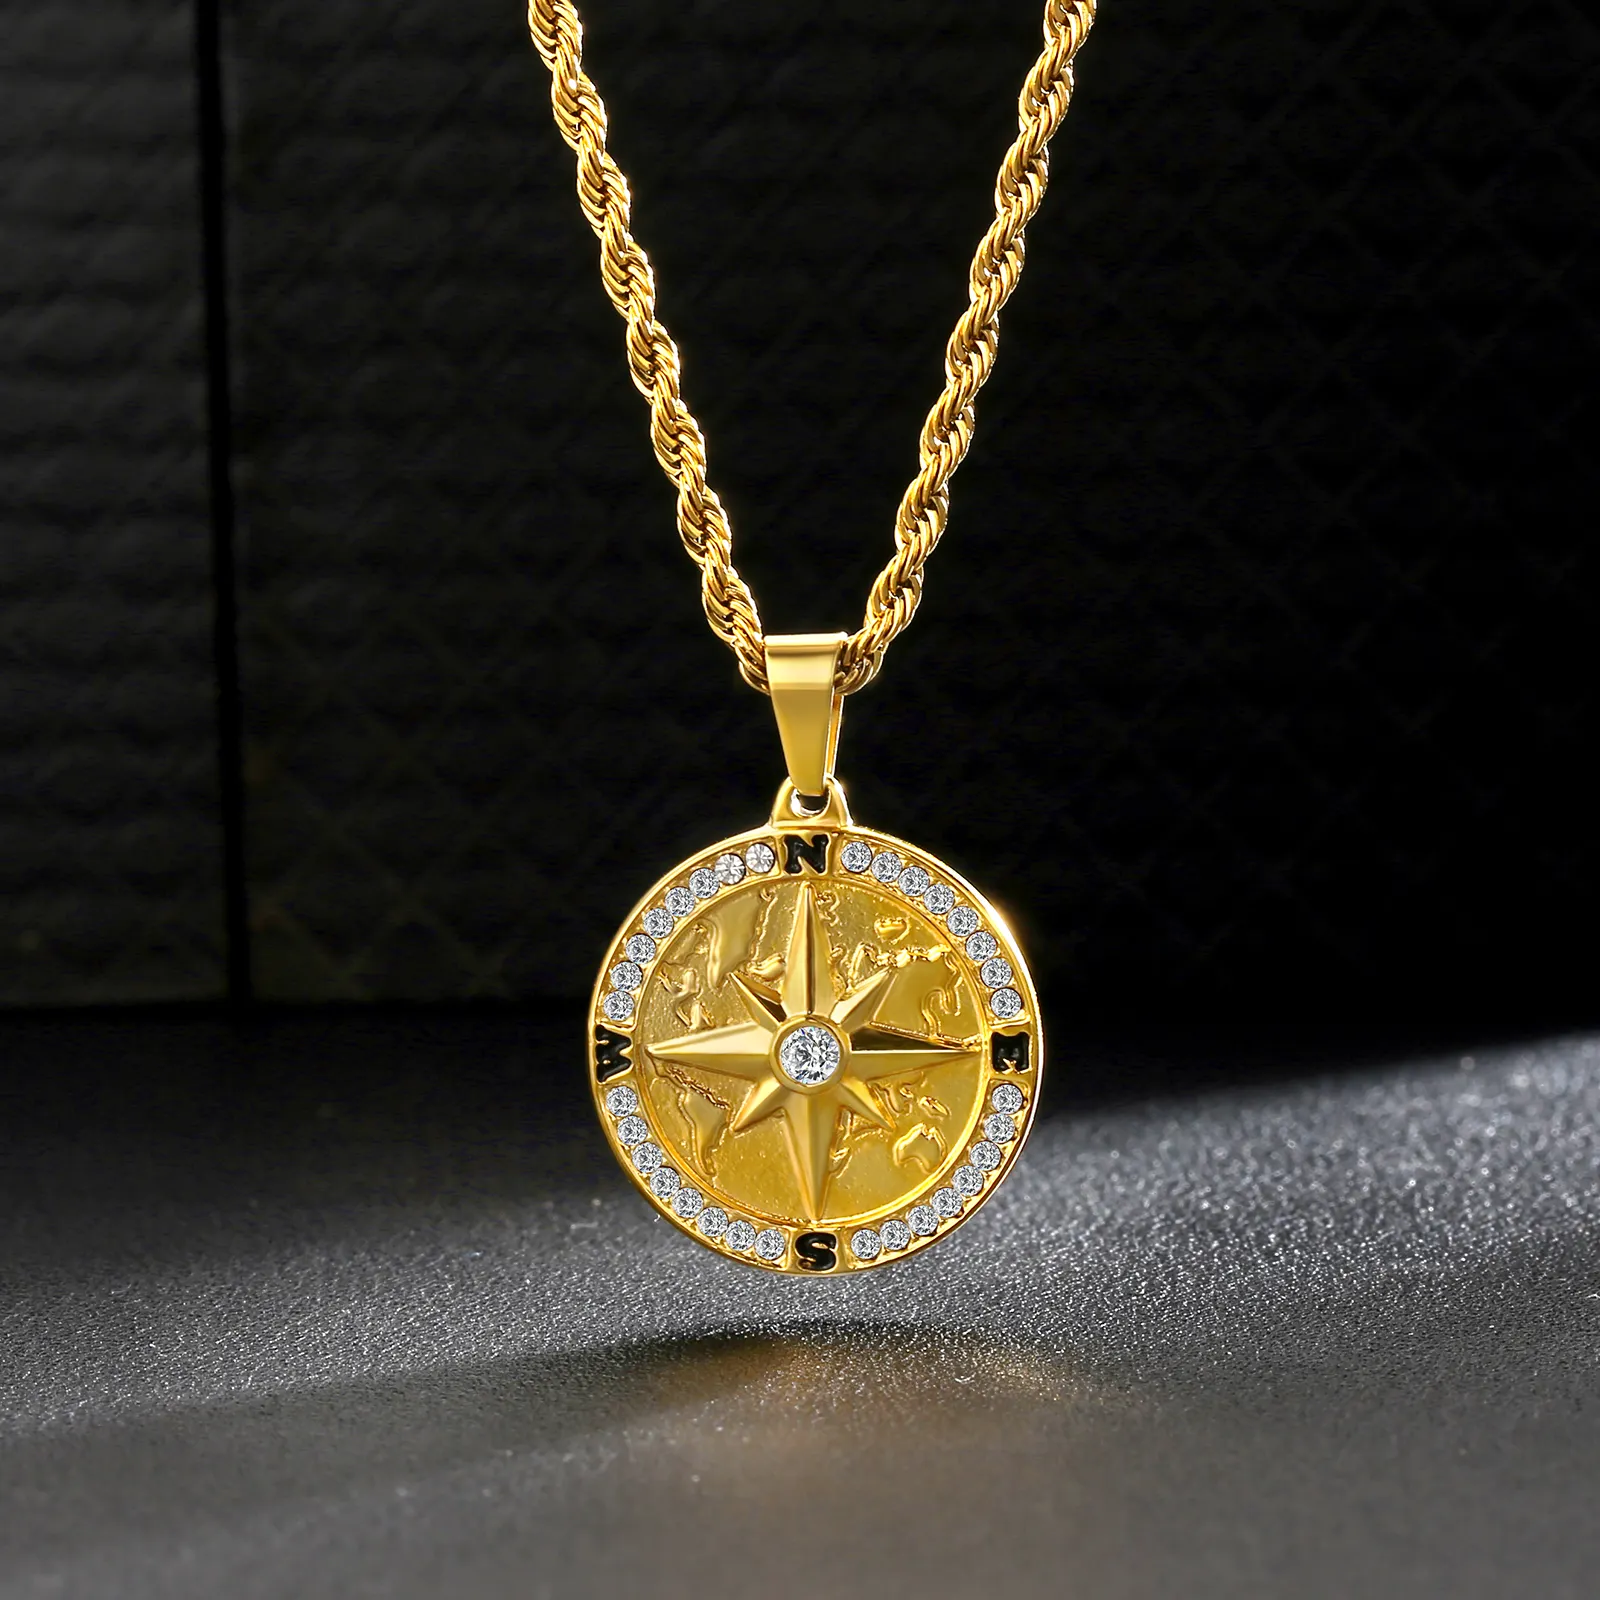 KRKC Stainless Steel 18k Gold Plated Metal Iced leo North Star Coin Compass Pendant Necklace Jewelry Women Mens Compass Necklace